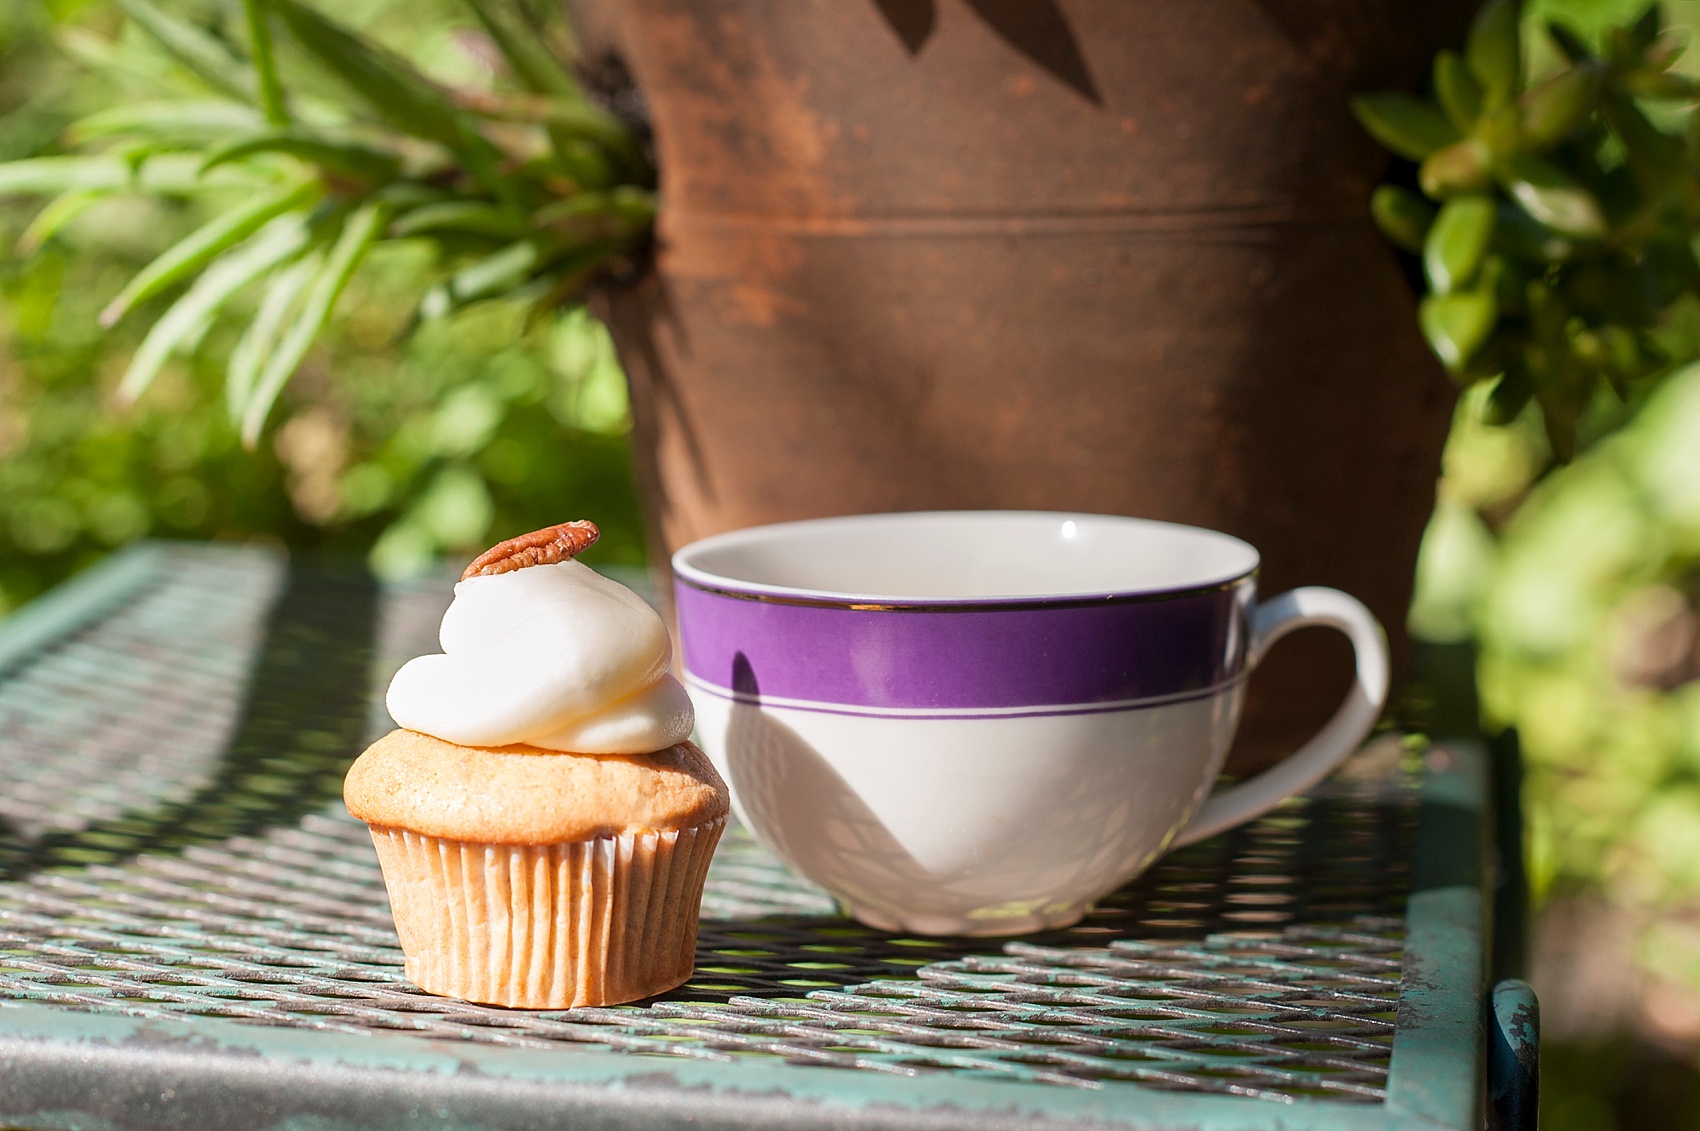 Hummingbird flavor from The Cupcake Shoppe, Raleigh, NC. Wedding photographer, Mikkel Paige Photography.